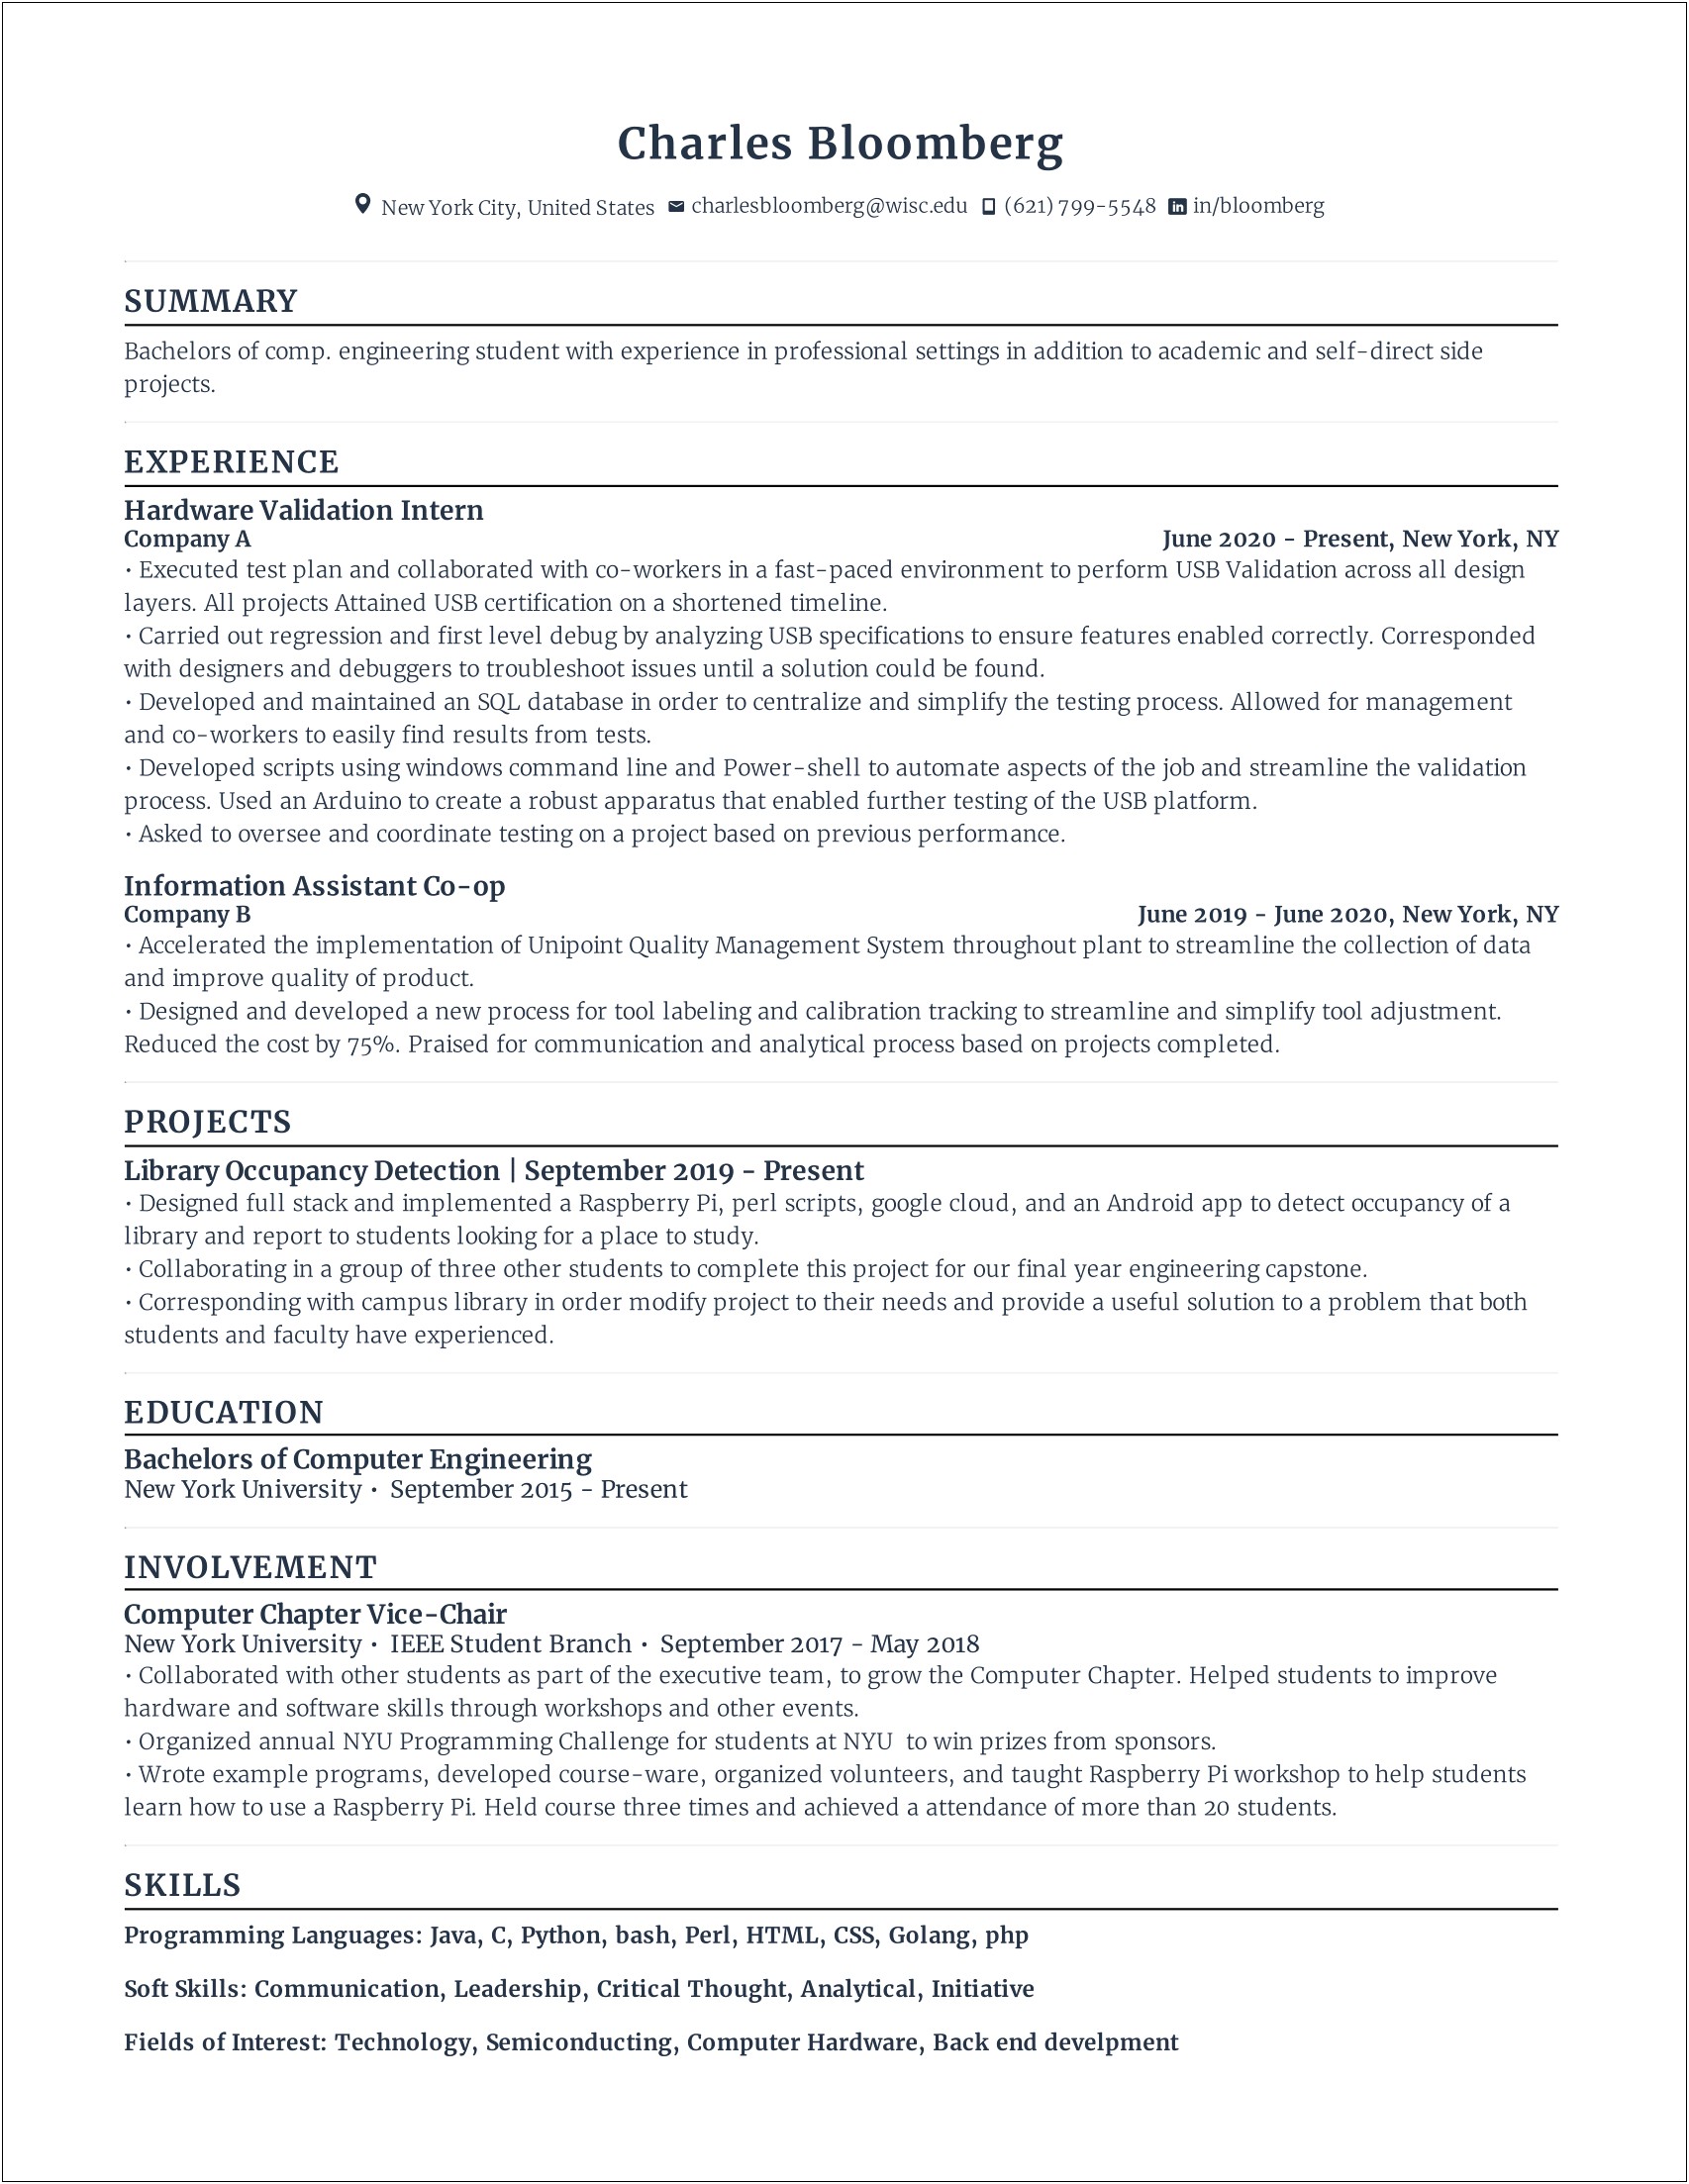 Experience Resume Sample For Embedded Engineer